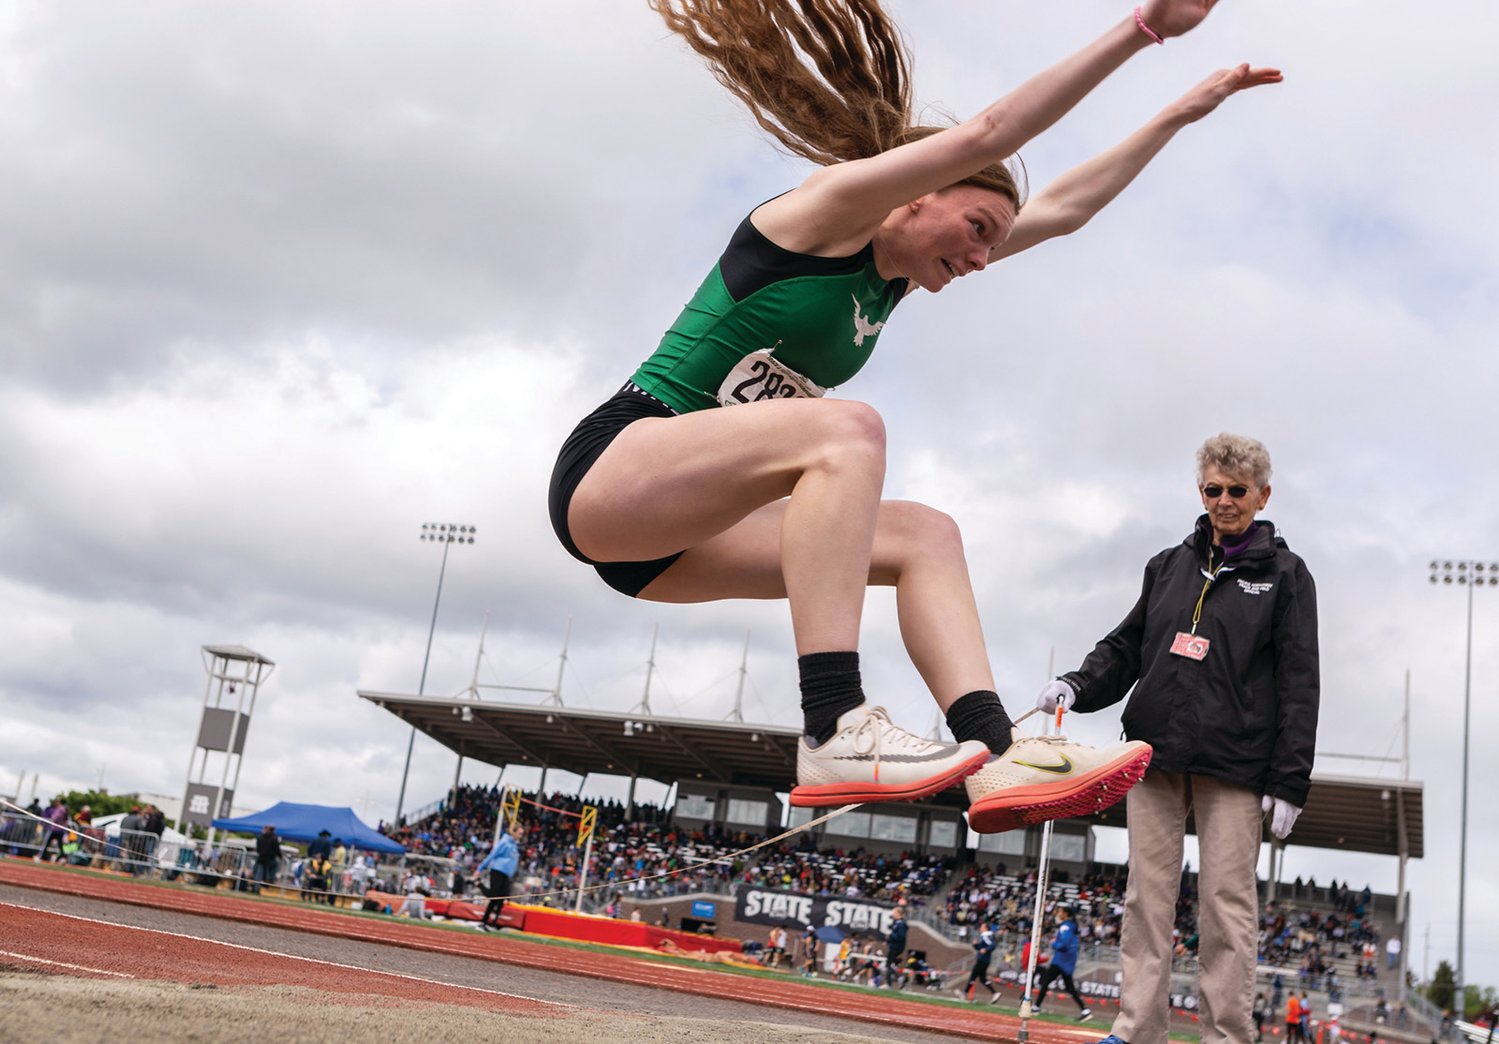 Tumwater's Alyssa Duncan flies through the air in the 2A Girls Long Jump at the 4A/3A/2A State Track and Field Championships on Friday, May 27, 2022, at Mount Tahoma High School in Tacoma. (Joshua Hart/For The Chronicle)